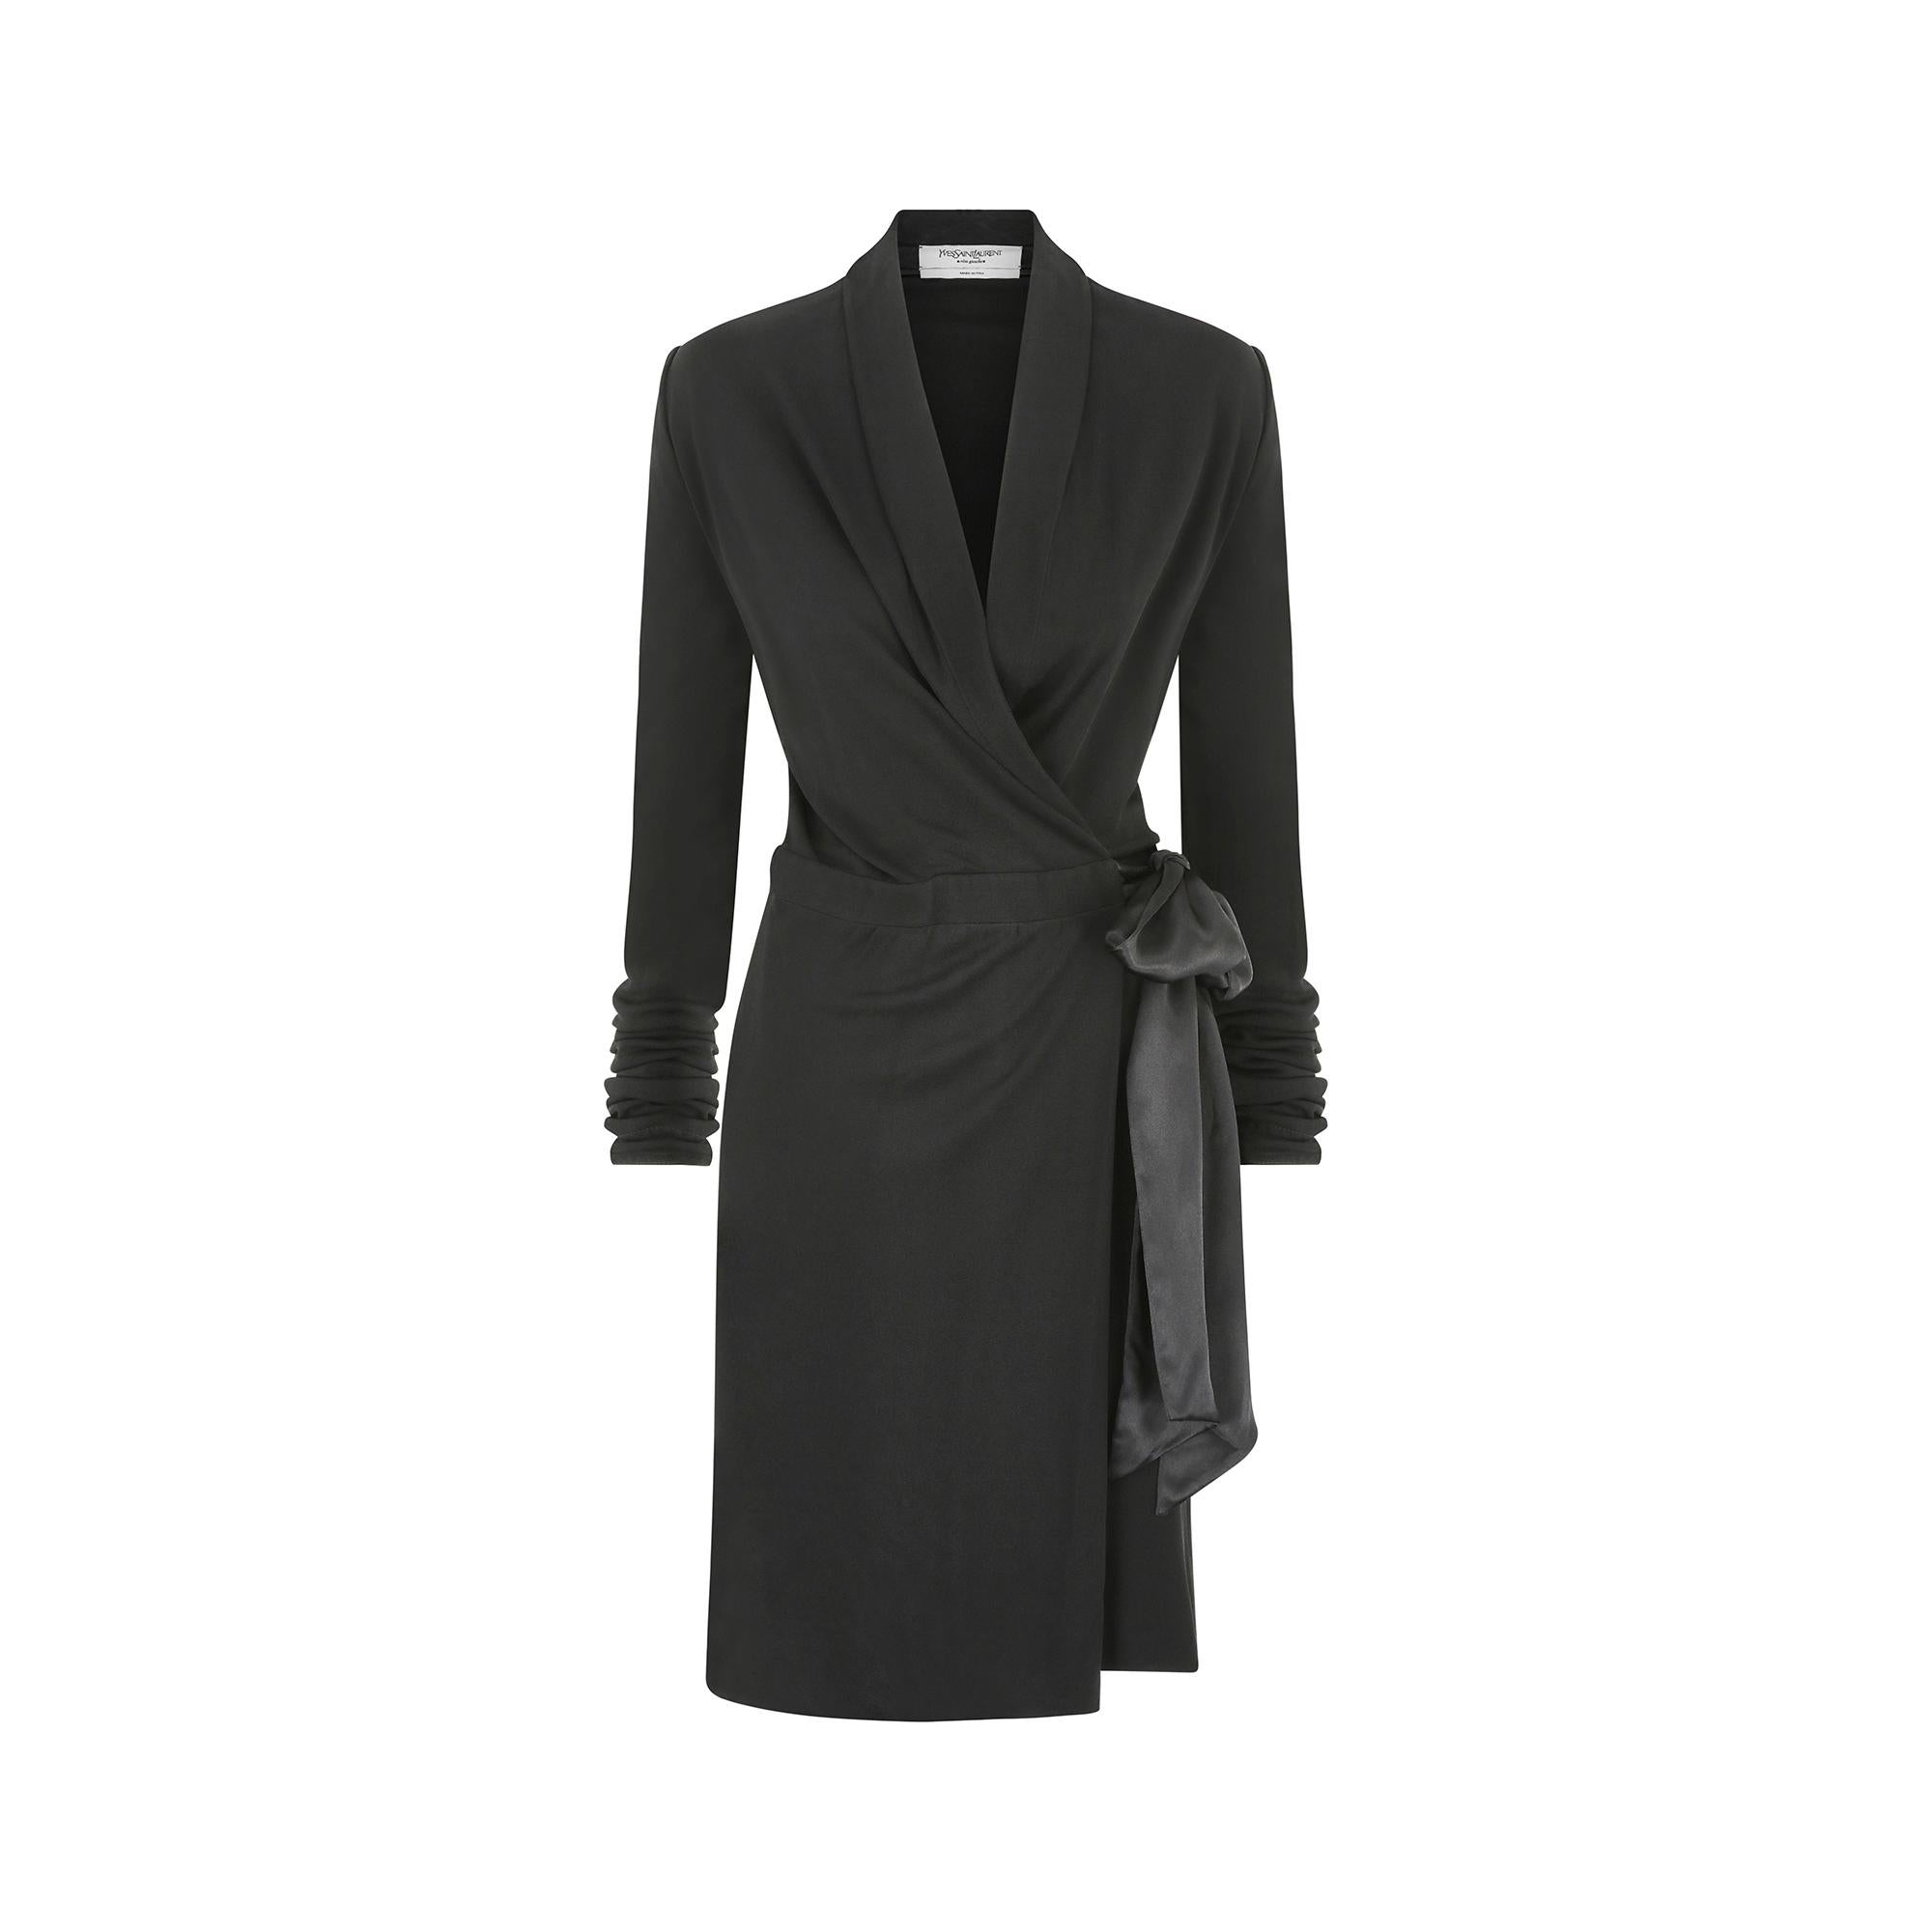 This elegant Yves Saint Laurent jersey dress is a signature design; almost every creative director since the couturier himself has interpreted this classic look in collections spanning all seasons. The inky black viscose fabric has a double